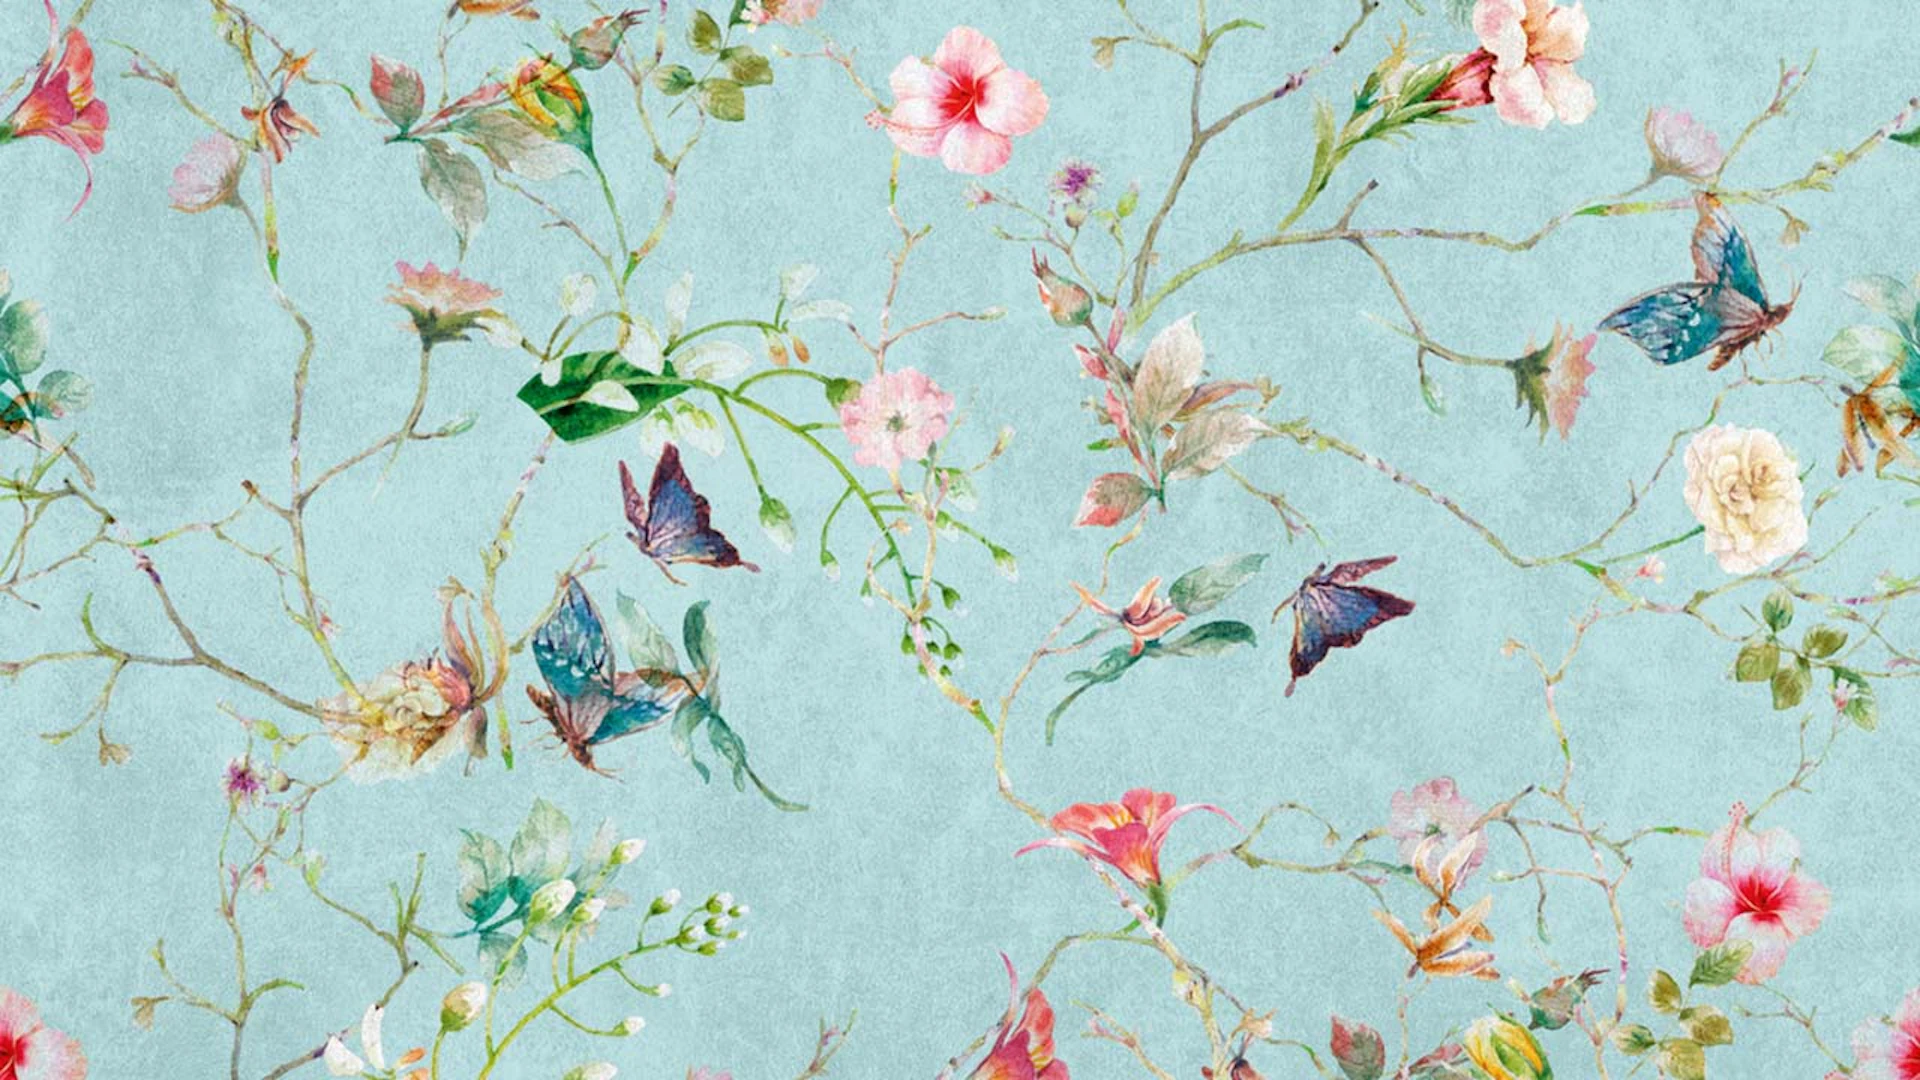 Vinyl wallpaper The Wall flowers & nature country house turquoise 681